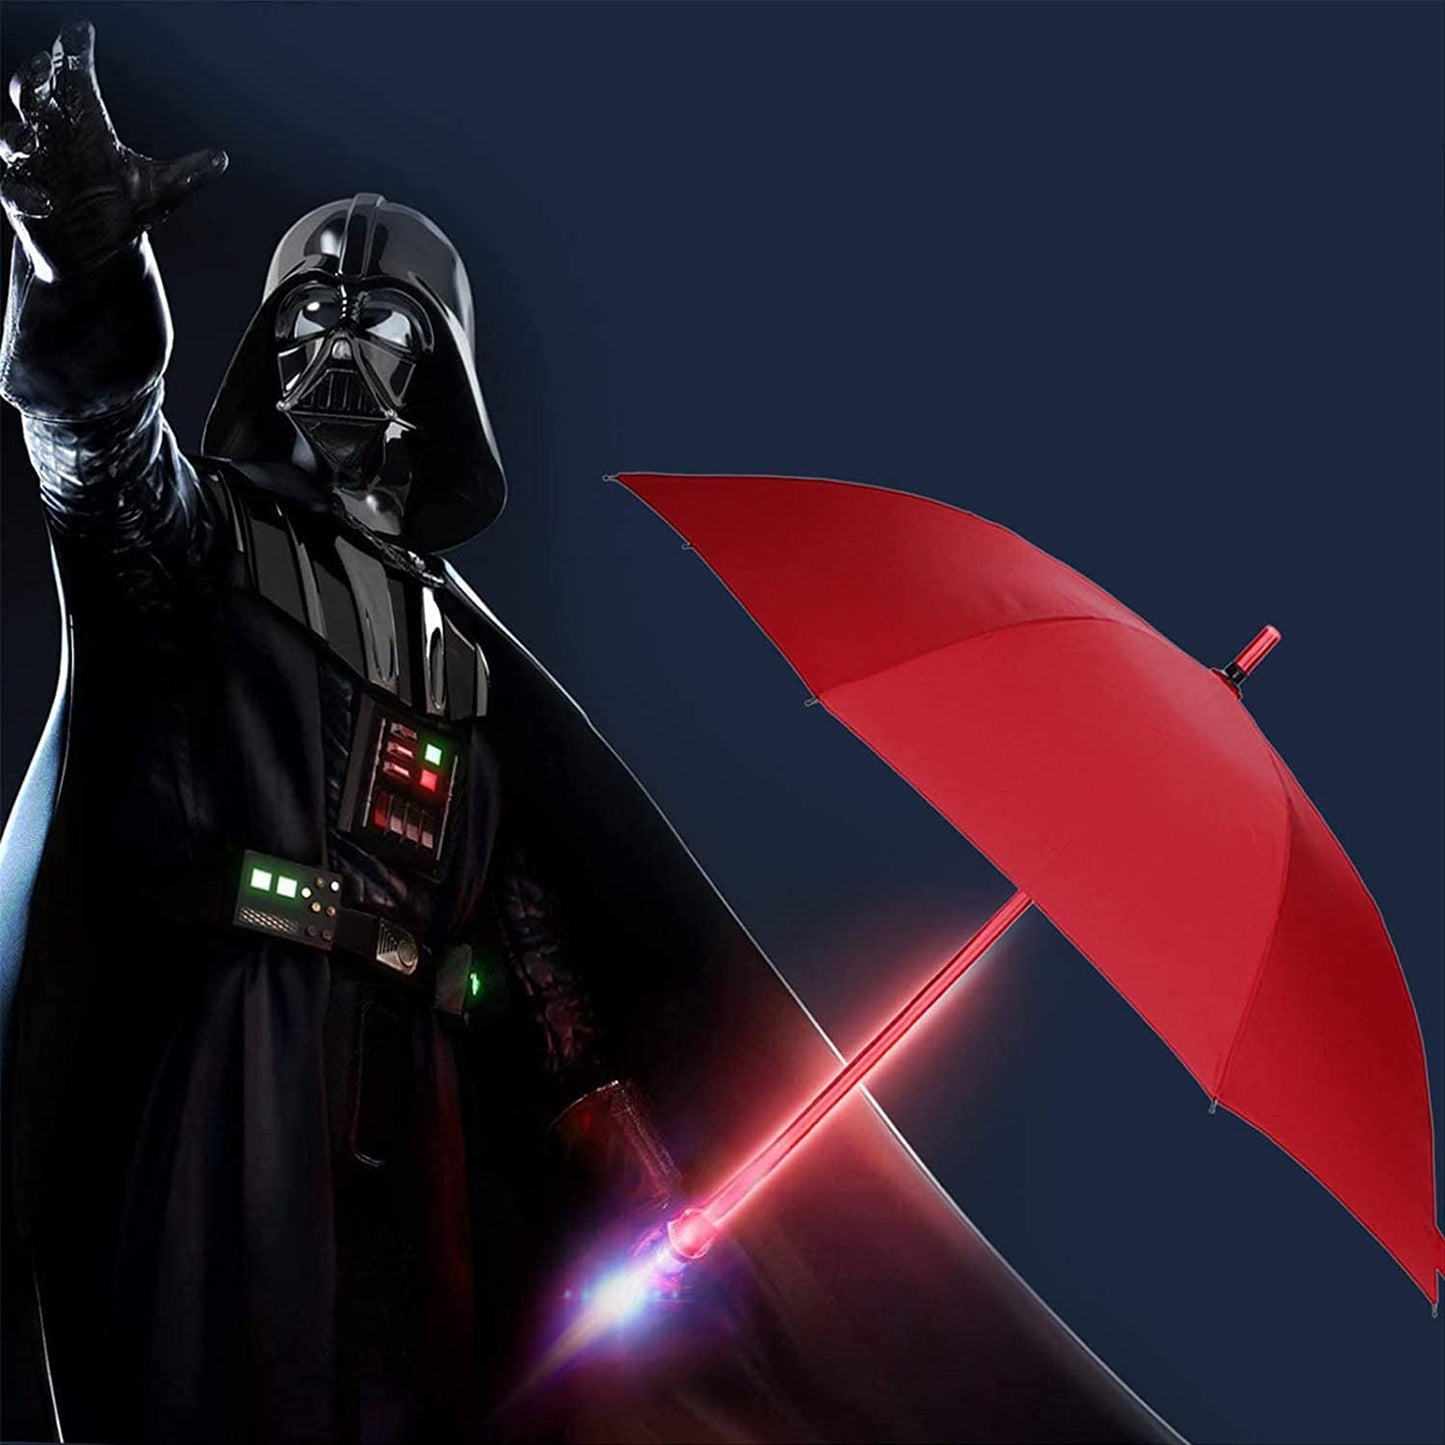 Darth Vader is pointing at the sky while holding a red colored LED lightsaber umbrella.